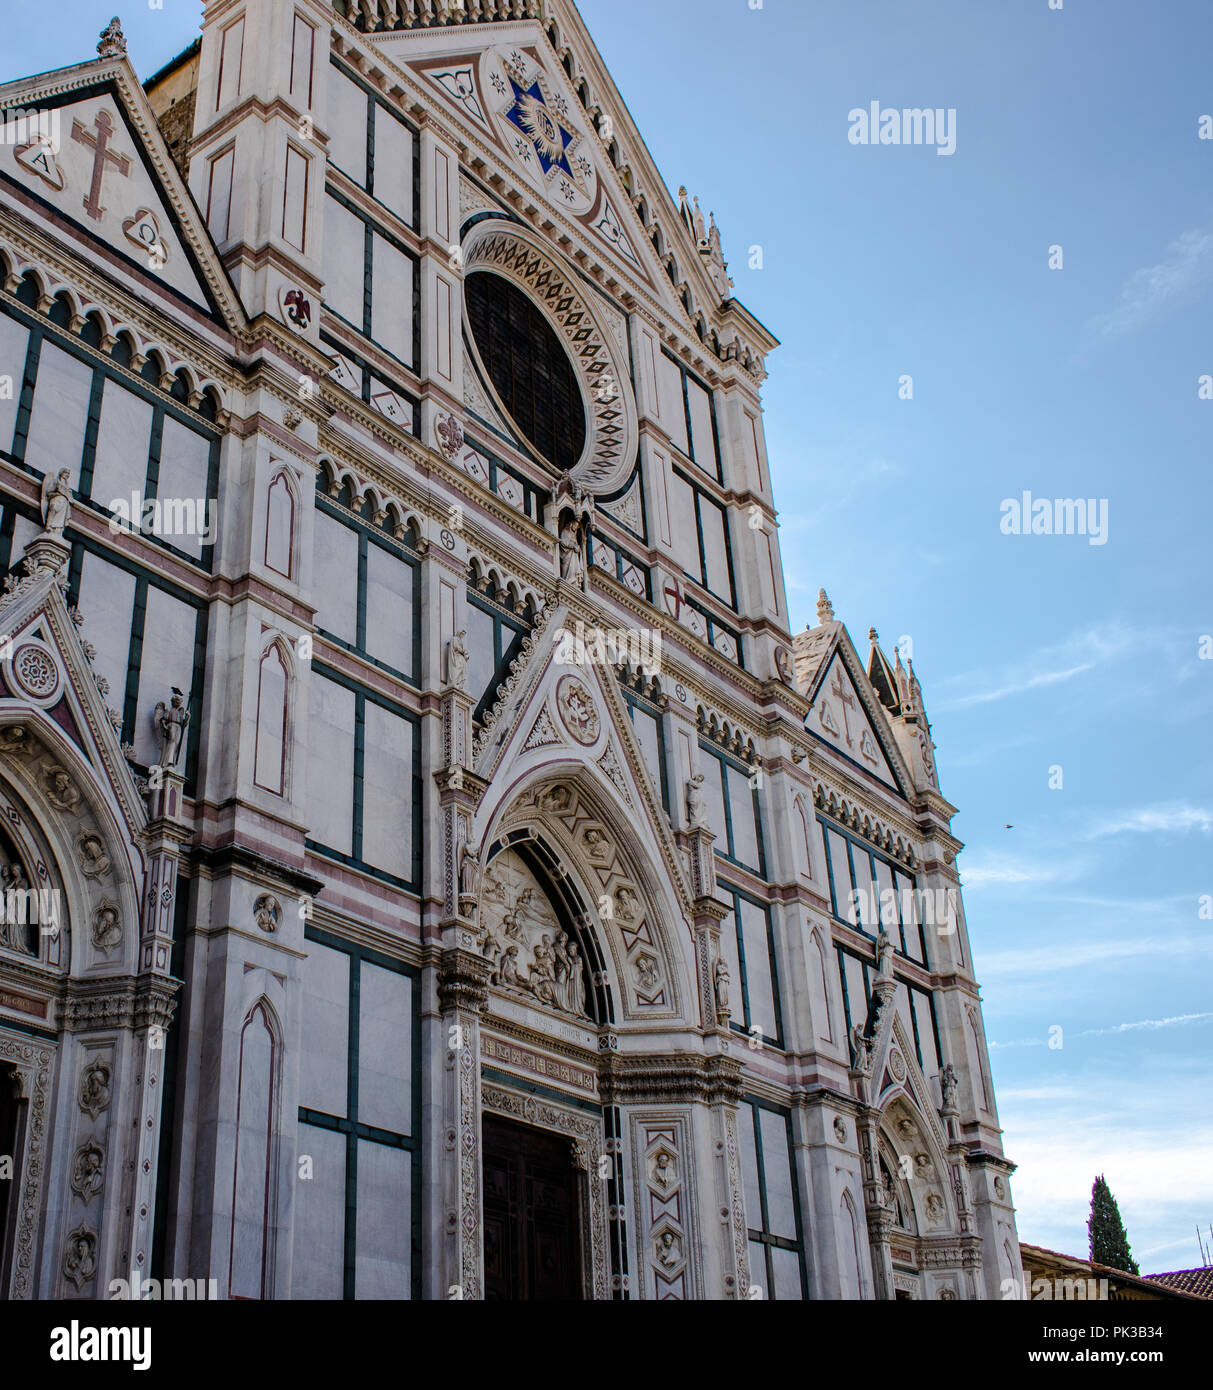 A beautiful shot of the Santa Maria del Fiore, or the Duomo as its more commonly known, the gothic roman cathedral church in Florence. Stock Photo